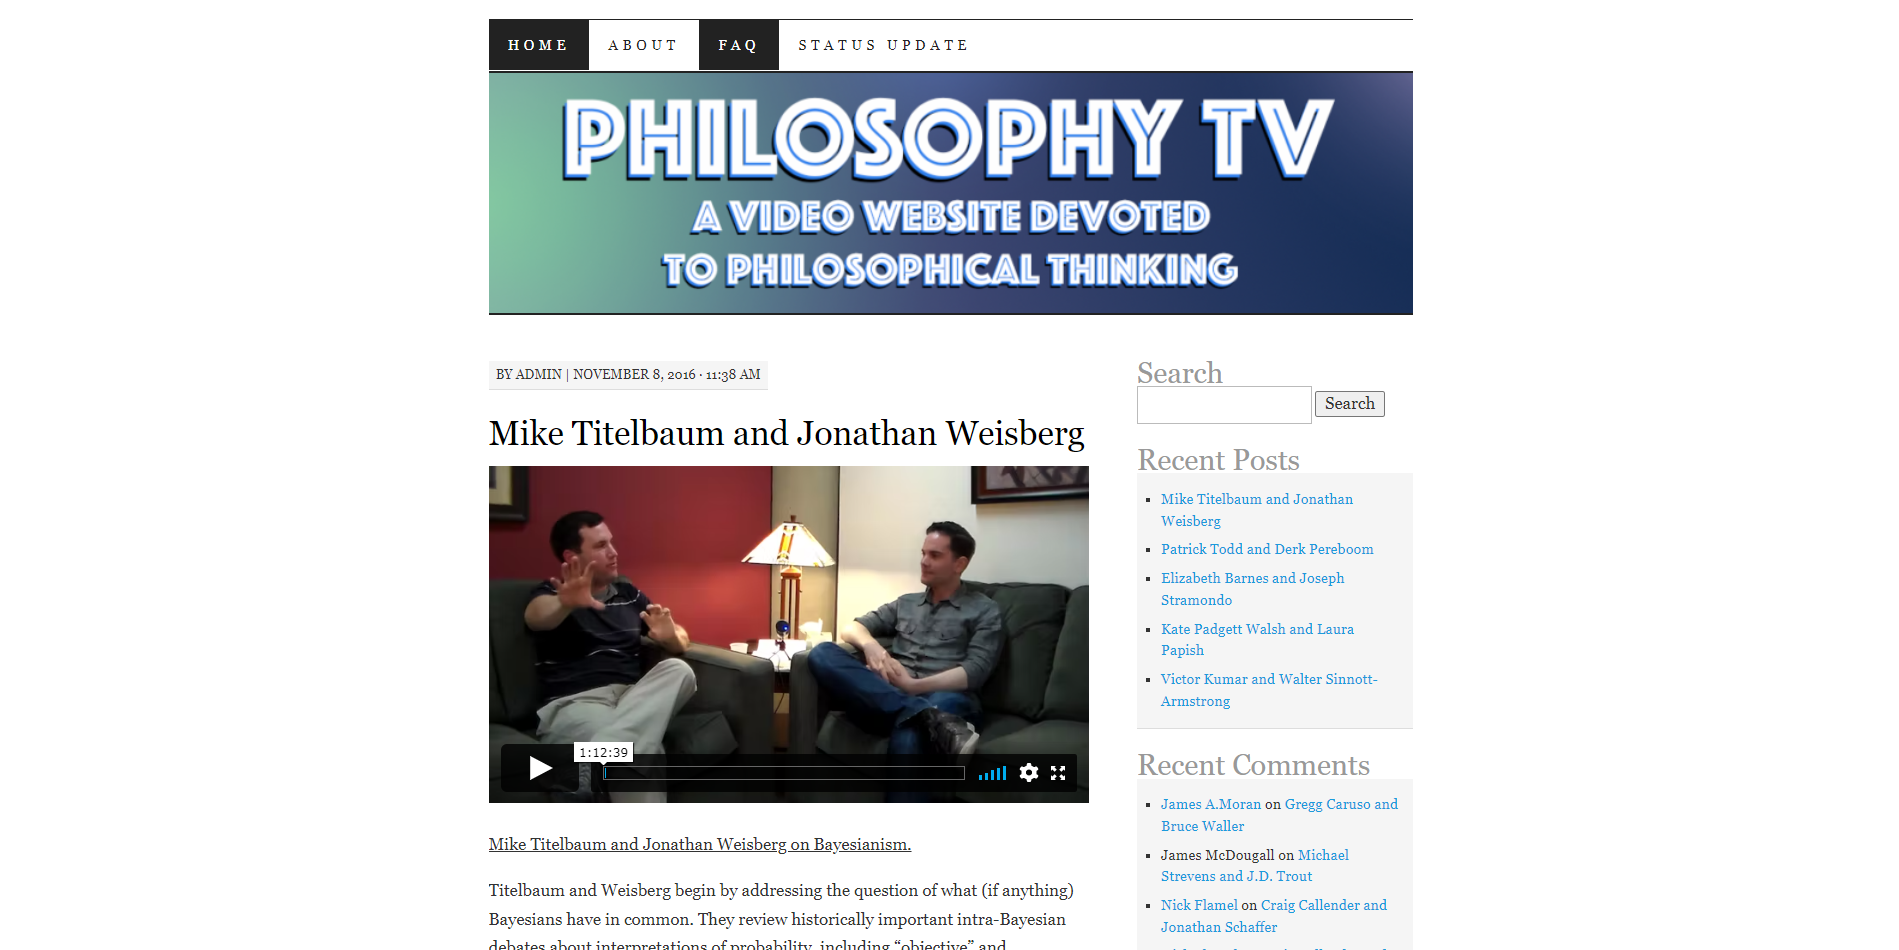 Philosophy TV: A video website devoted to philosophical thinking